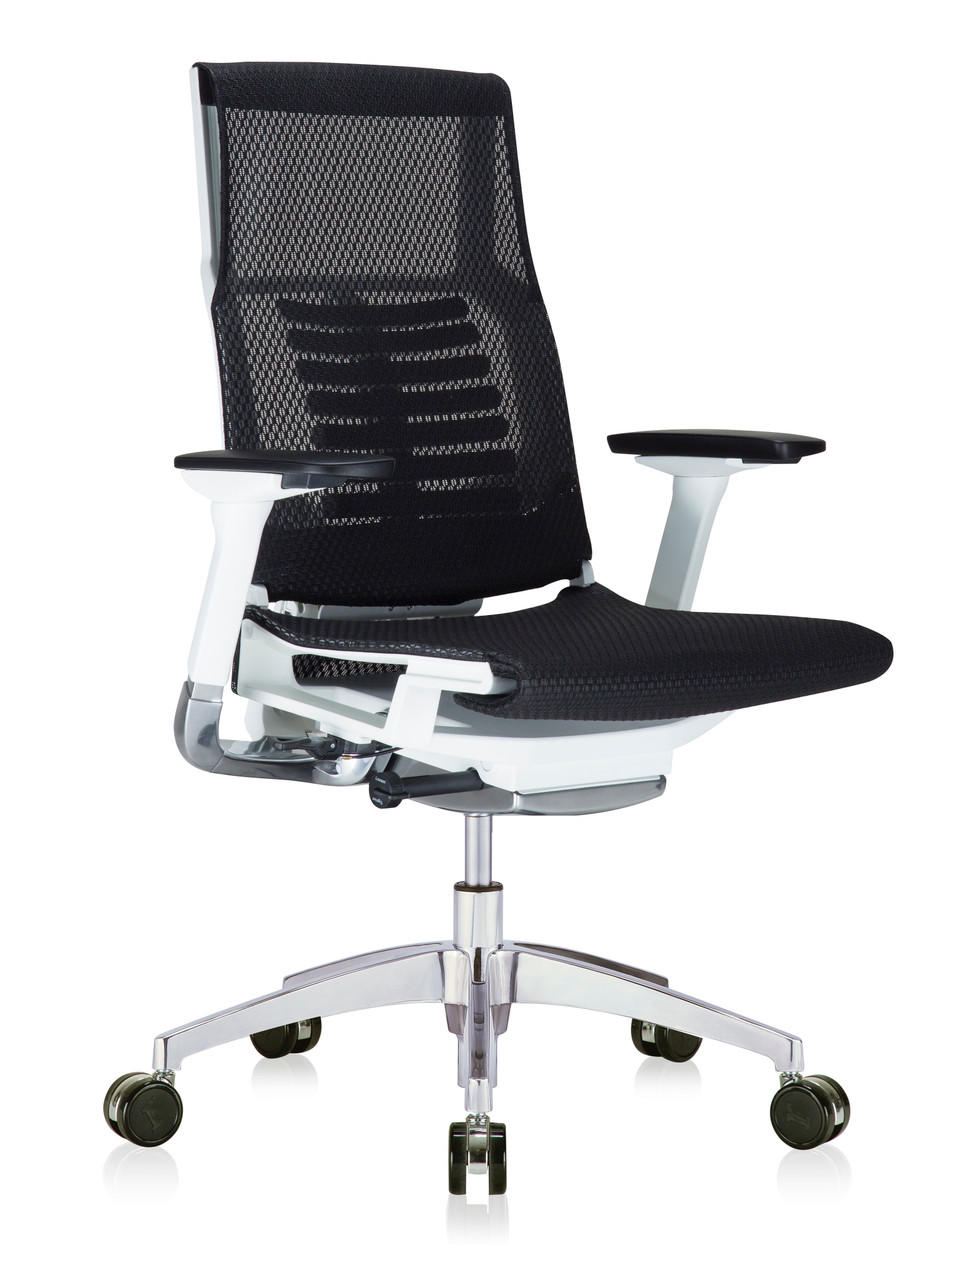 Eurotech Seating Eurotech Powerfit All Mesh Bionic Chair with White Frame 